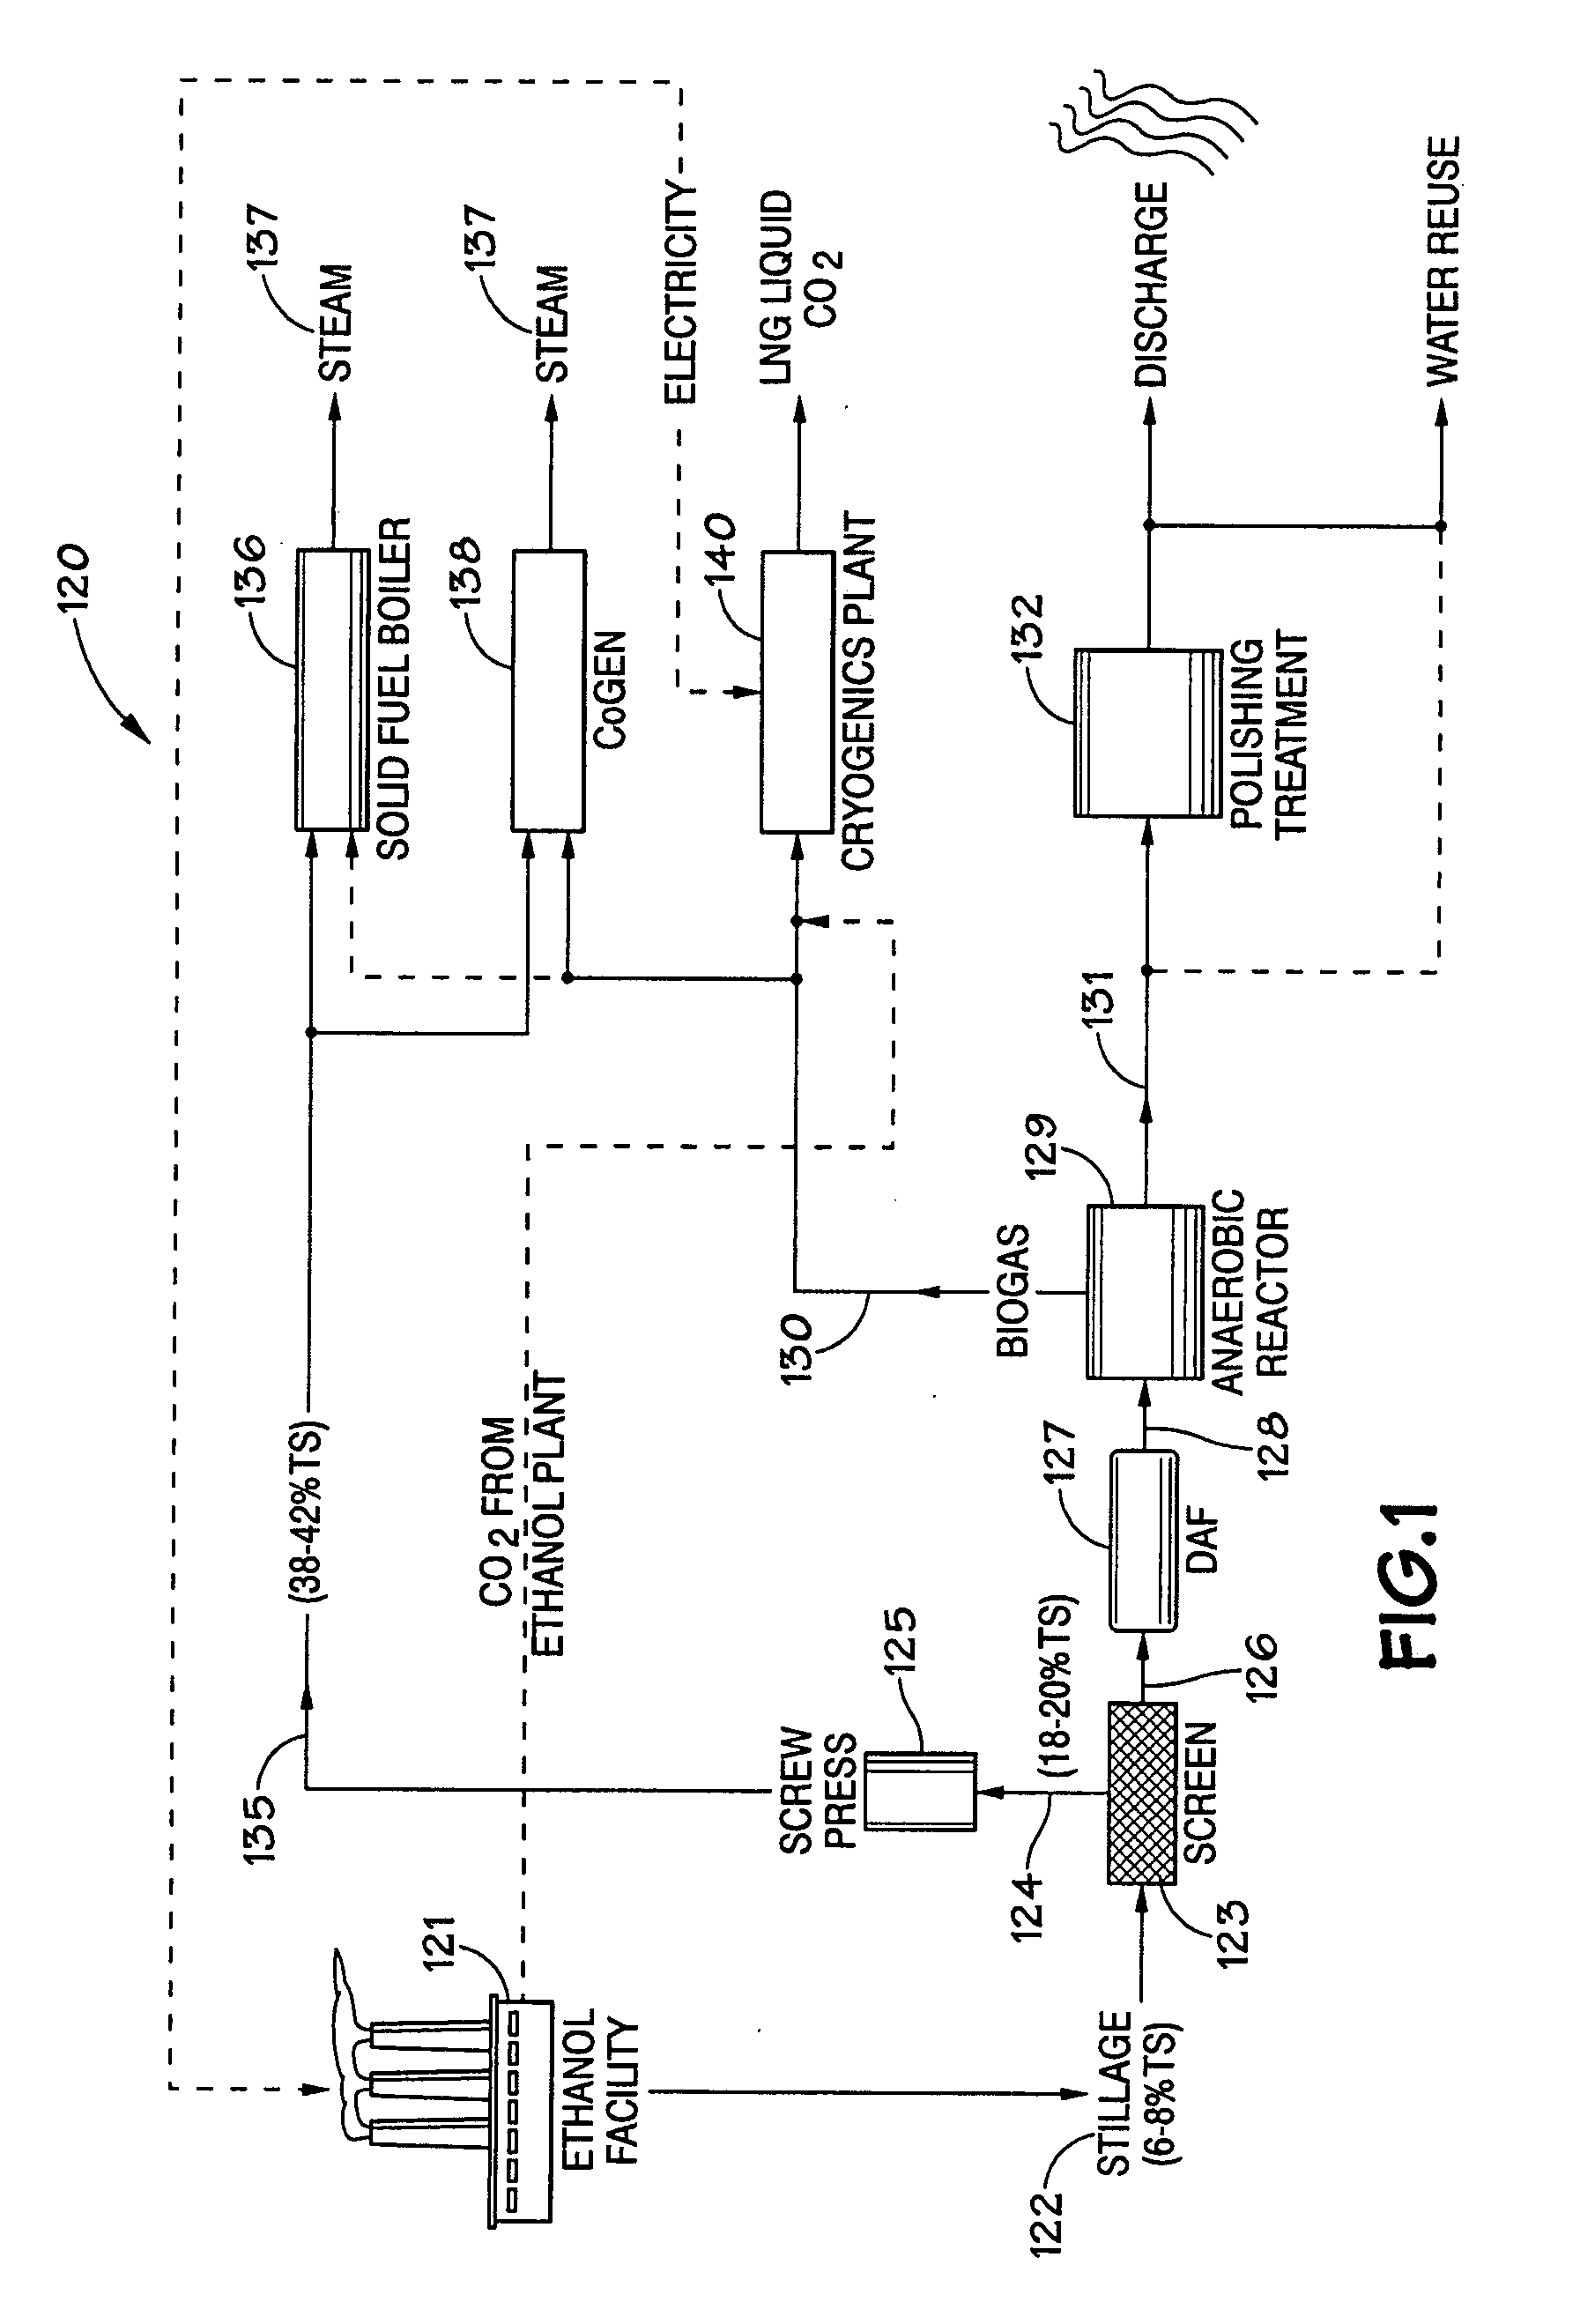 Method and apparatus for the treatment of byproducts from ethanol and spirits production